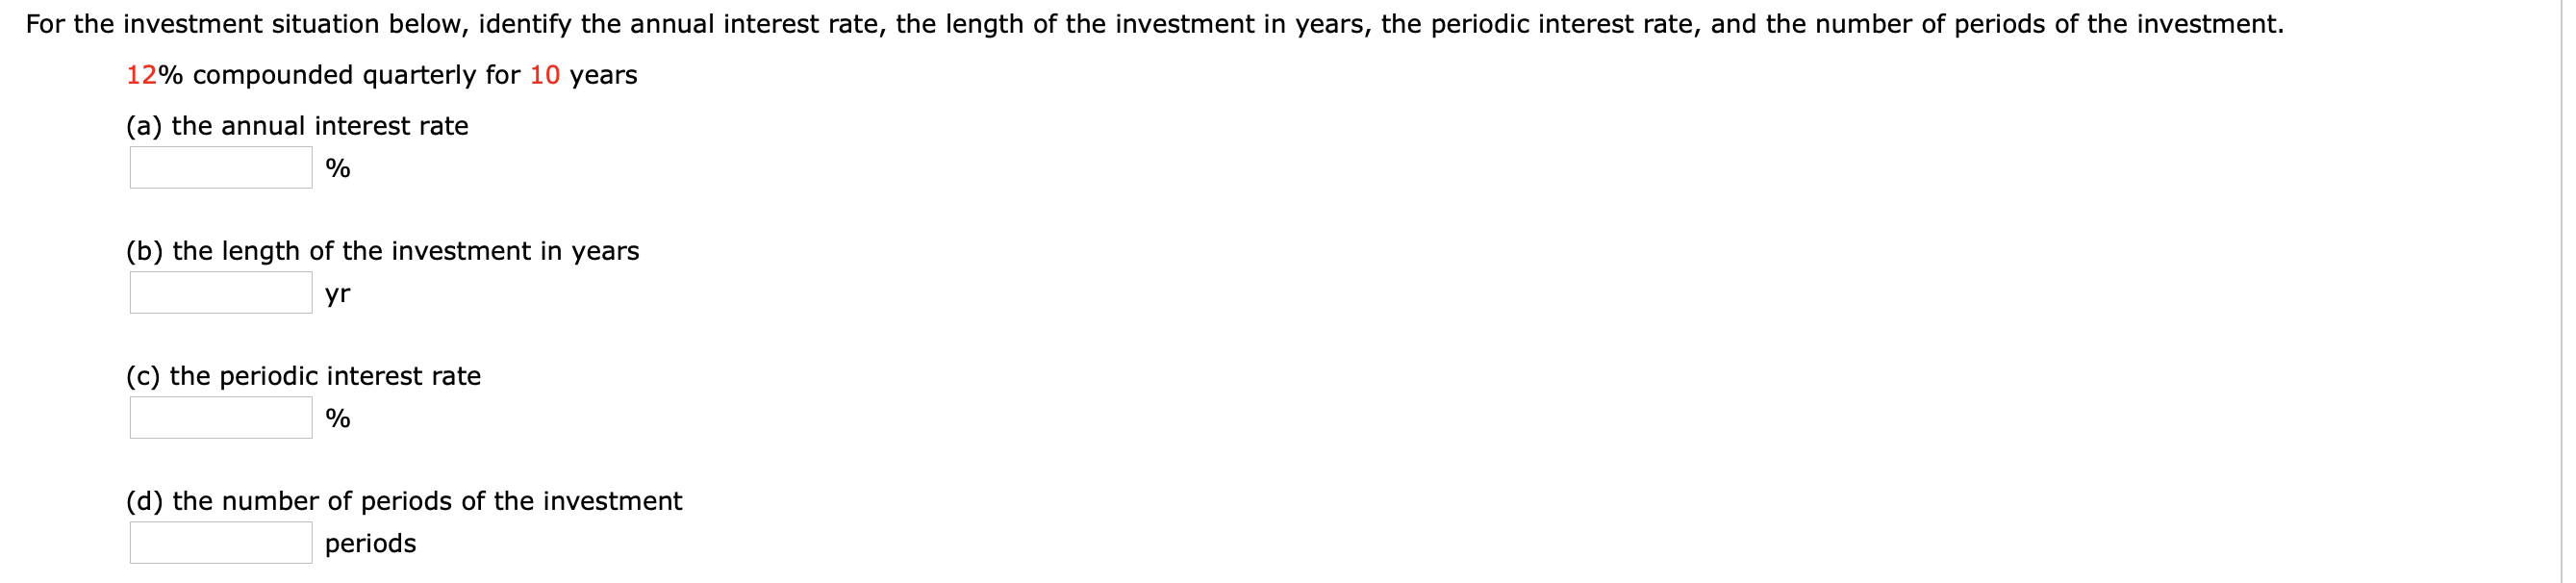 For the investment situation below, identify the annual interest rate, the length of the investment in years, the periodic interest rate, and the number of periods of the investment.
12% compounded quarterly for 10 years
(a) the annual interest rate
(b) the length of the investment in years
yr
(c) the periodic interest rate
(d) the number of periods of the investment
periods
